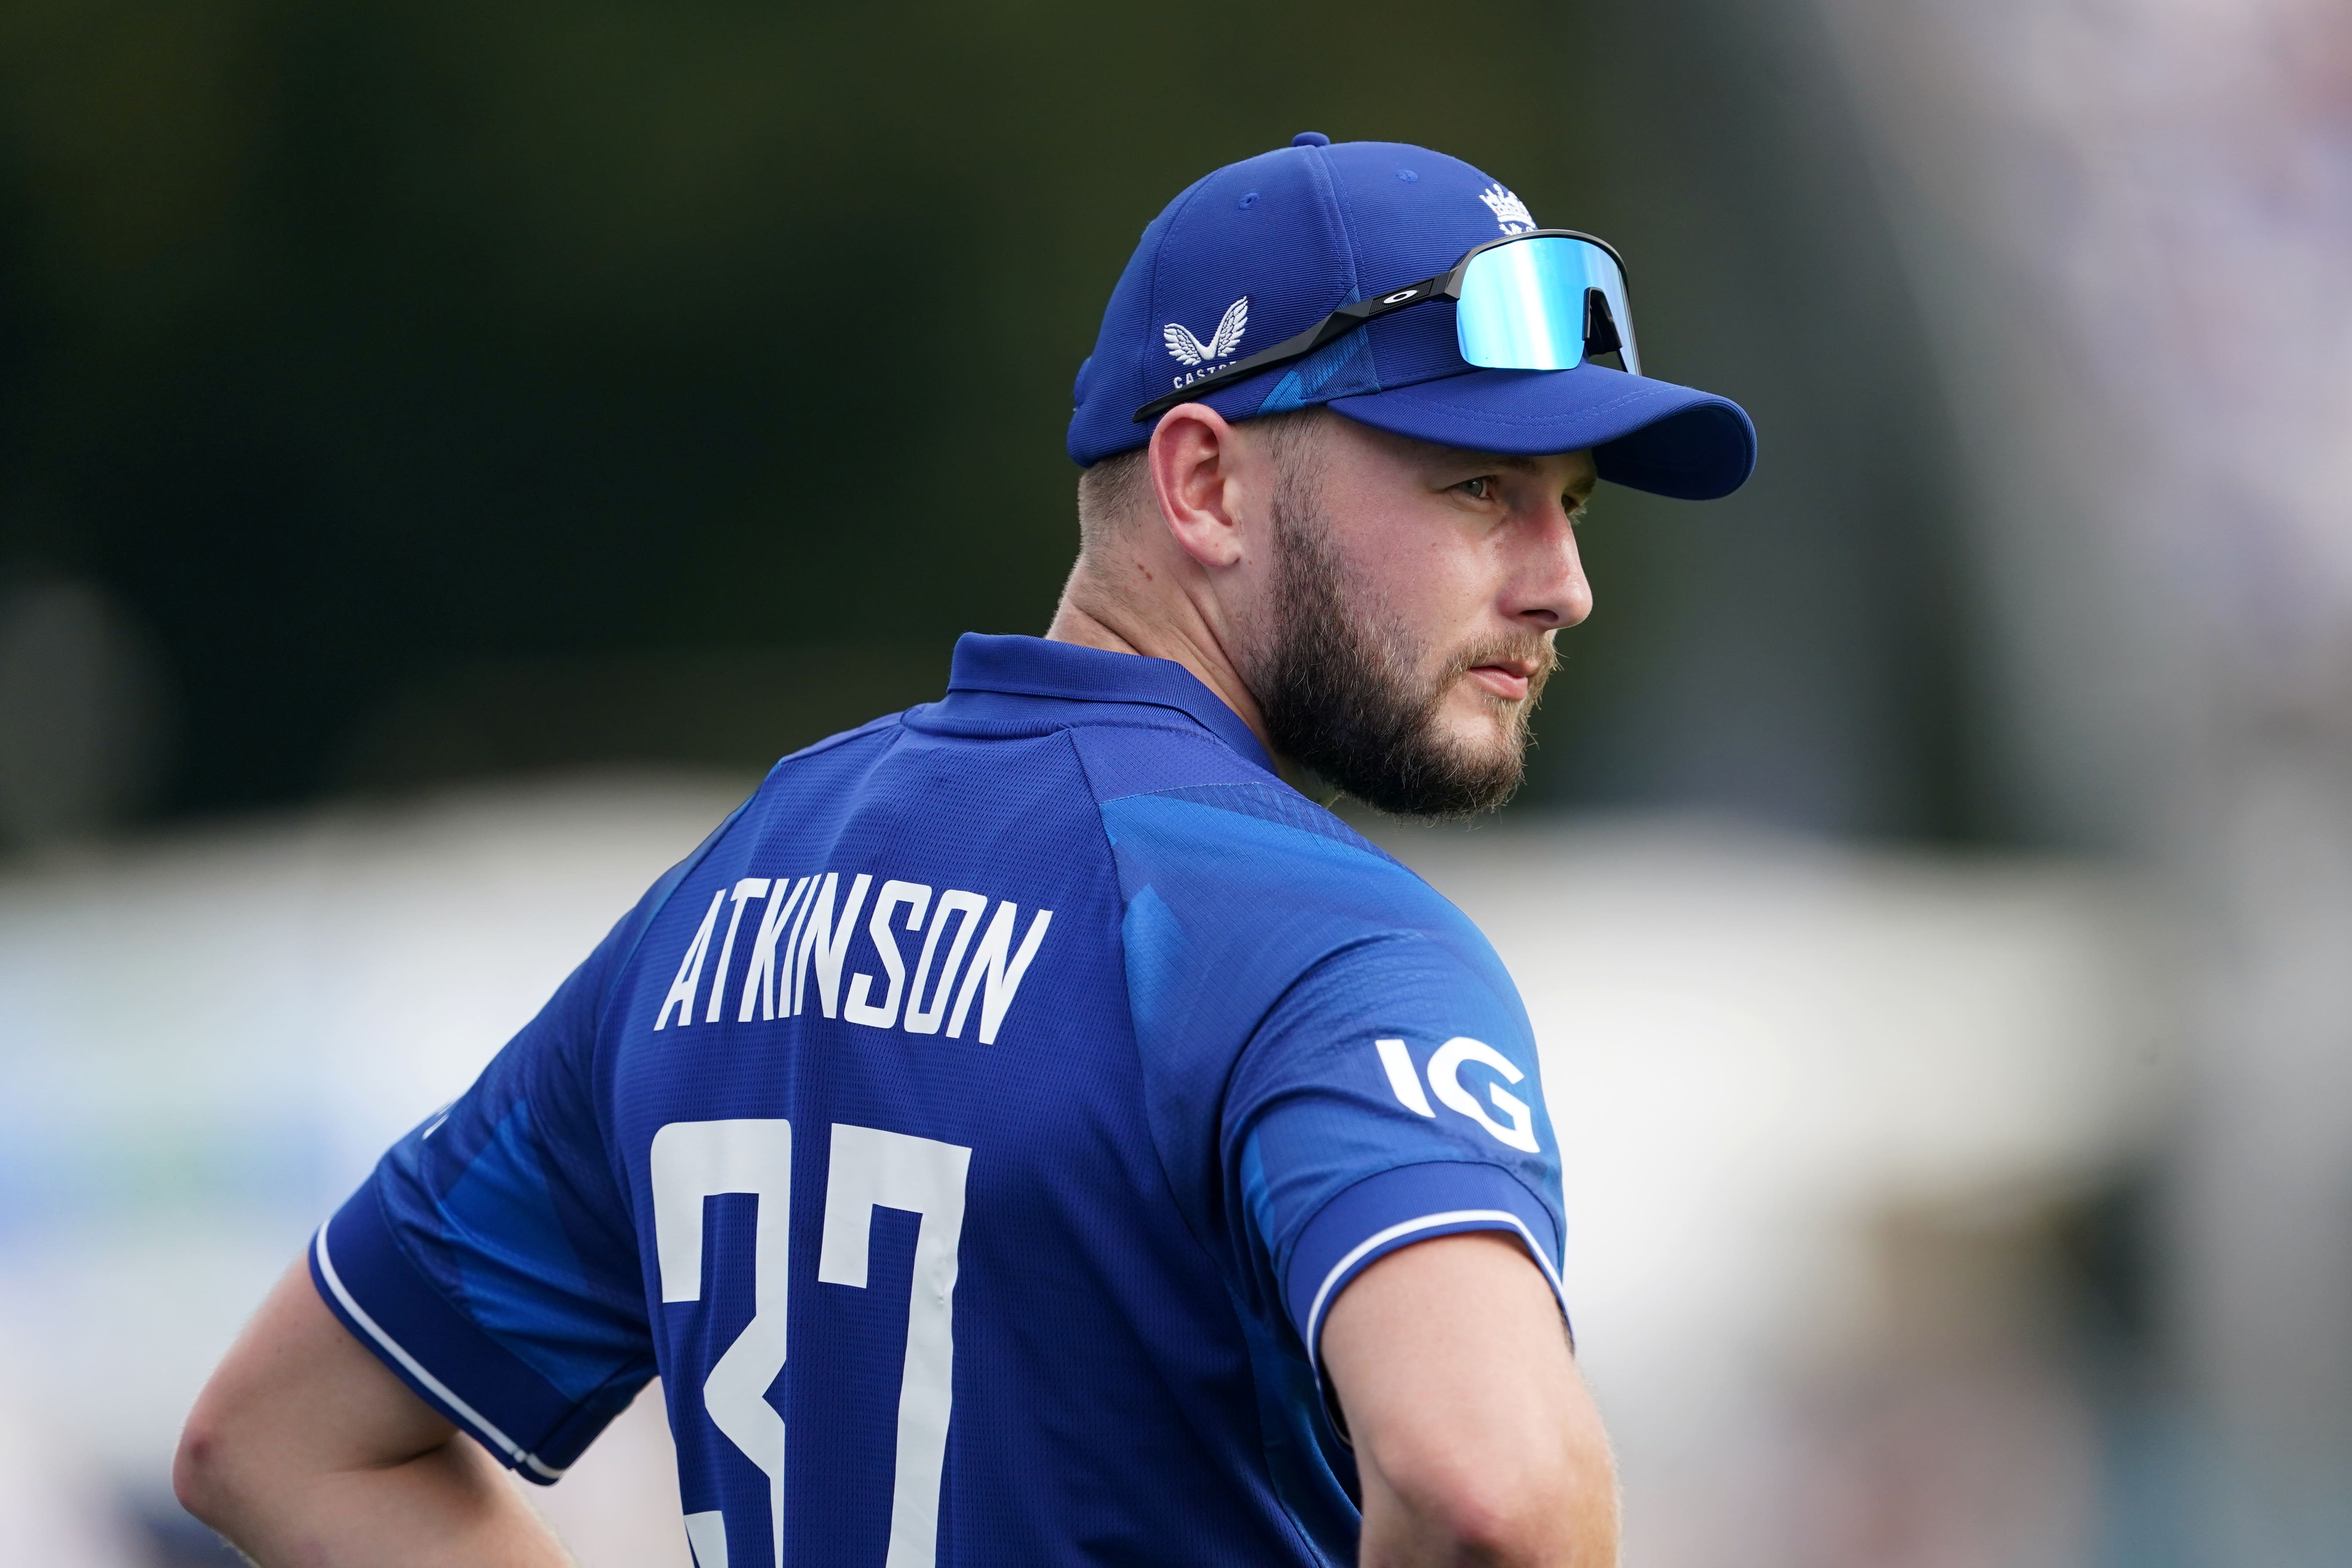 Gus Atkinson will make his Test debut against the West Indies on Wednesday (Joe Giddens/PA).